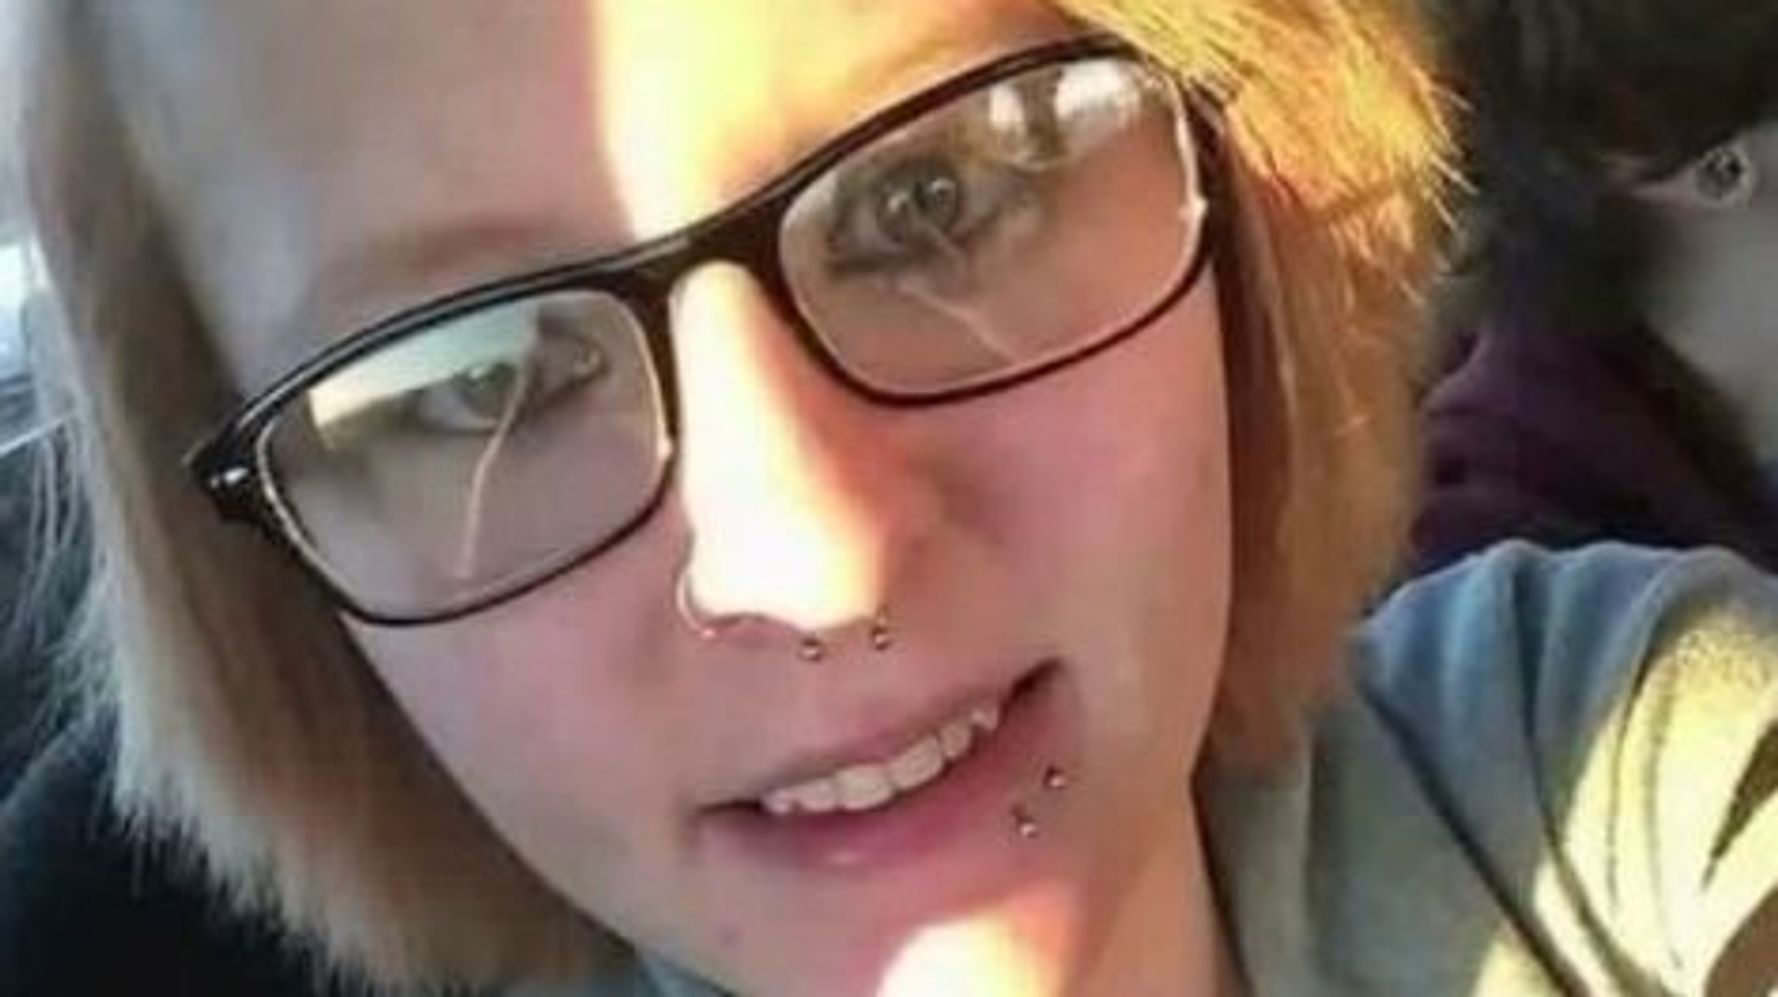 Young Woman Found Dead In Car, Another Missing | HuffPost